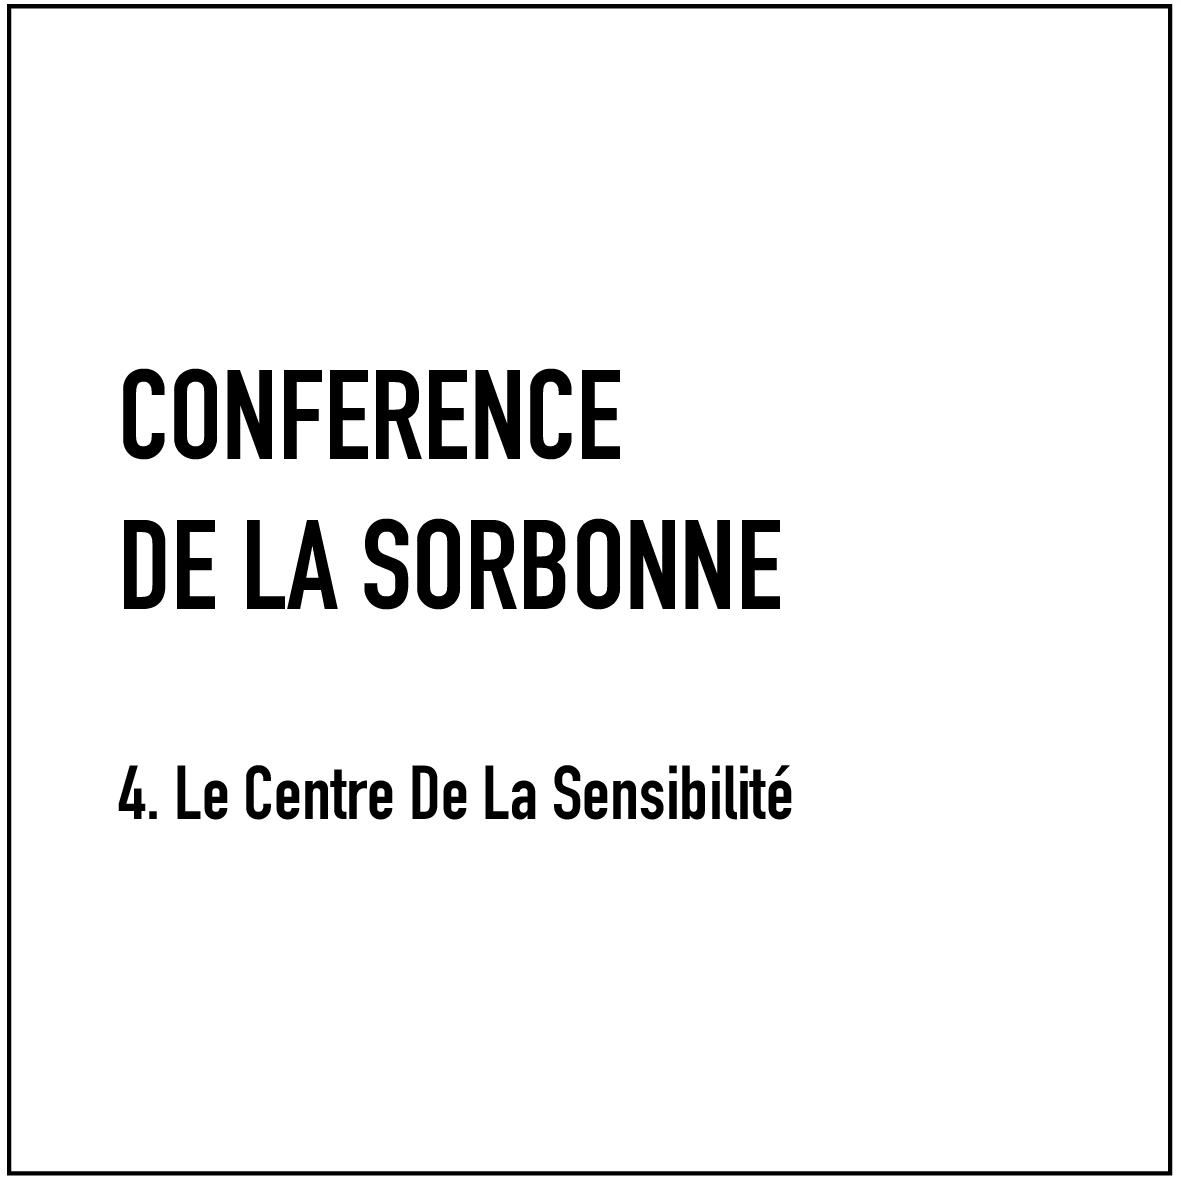 Lecture at the Sorbonne - 4. The Centre Of Sensibility